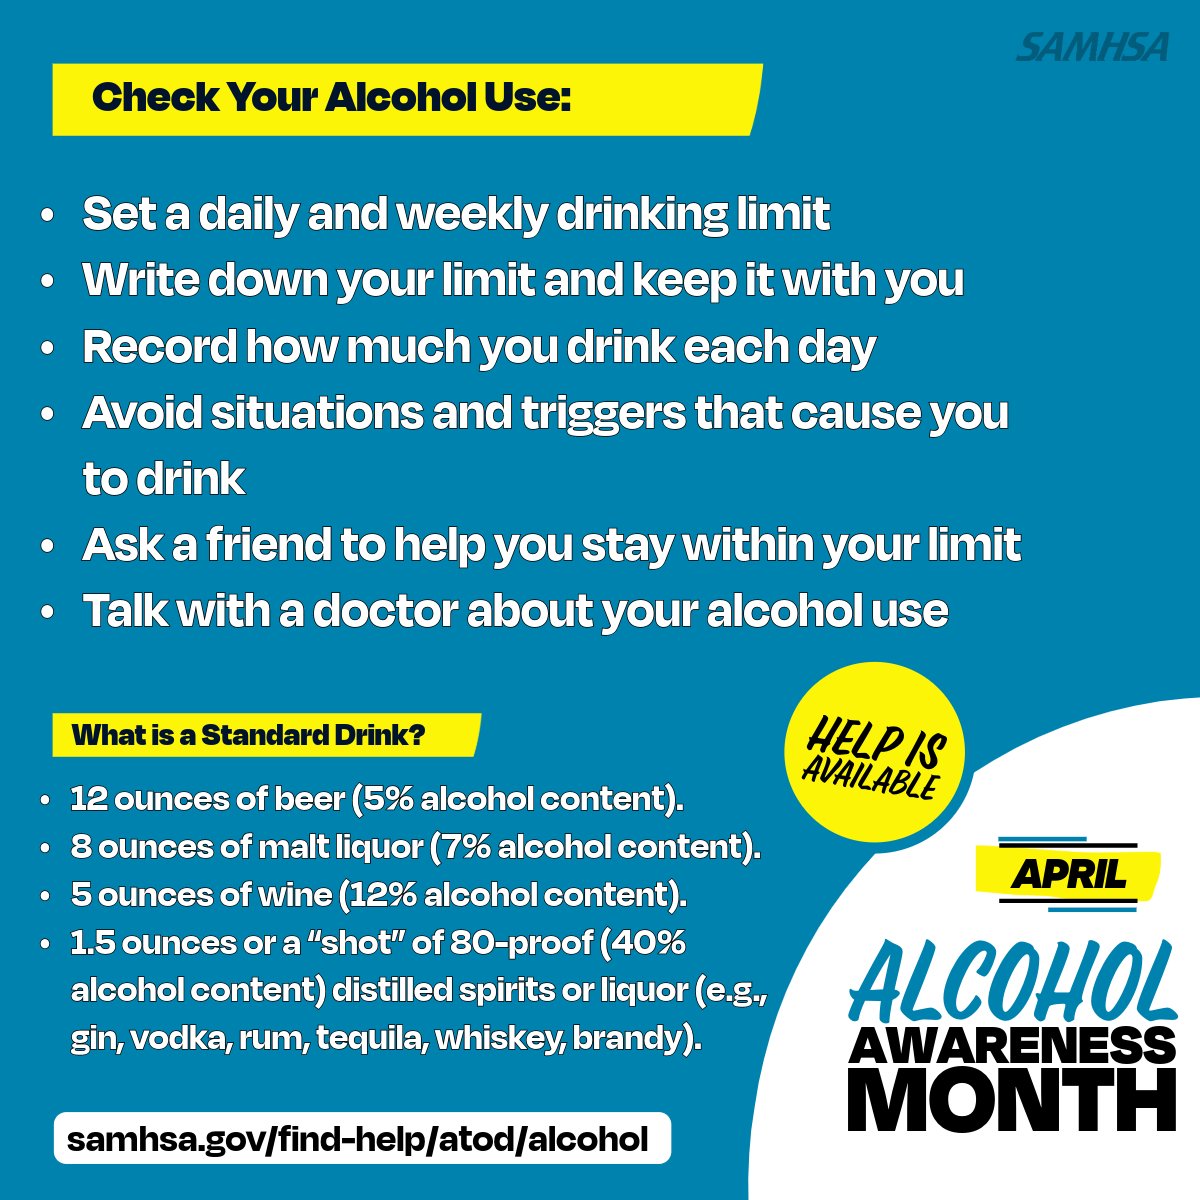 Do you know what is considered a standard drink? 12 oz of beer; 8 oz of malt liquor; 5 oz of wine; 1.5 oz of distilled spirits or liquor are considered standard drinks. Learn more about alcohol use this #AlcoholAwarenessMonth: samhsa.gov/find-help/atod…